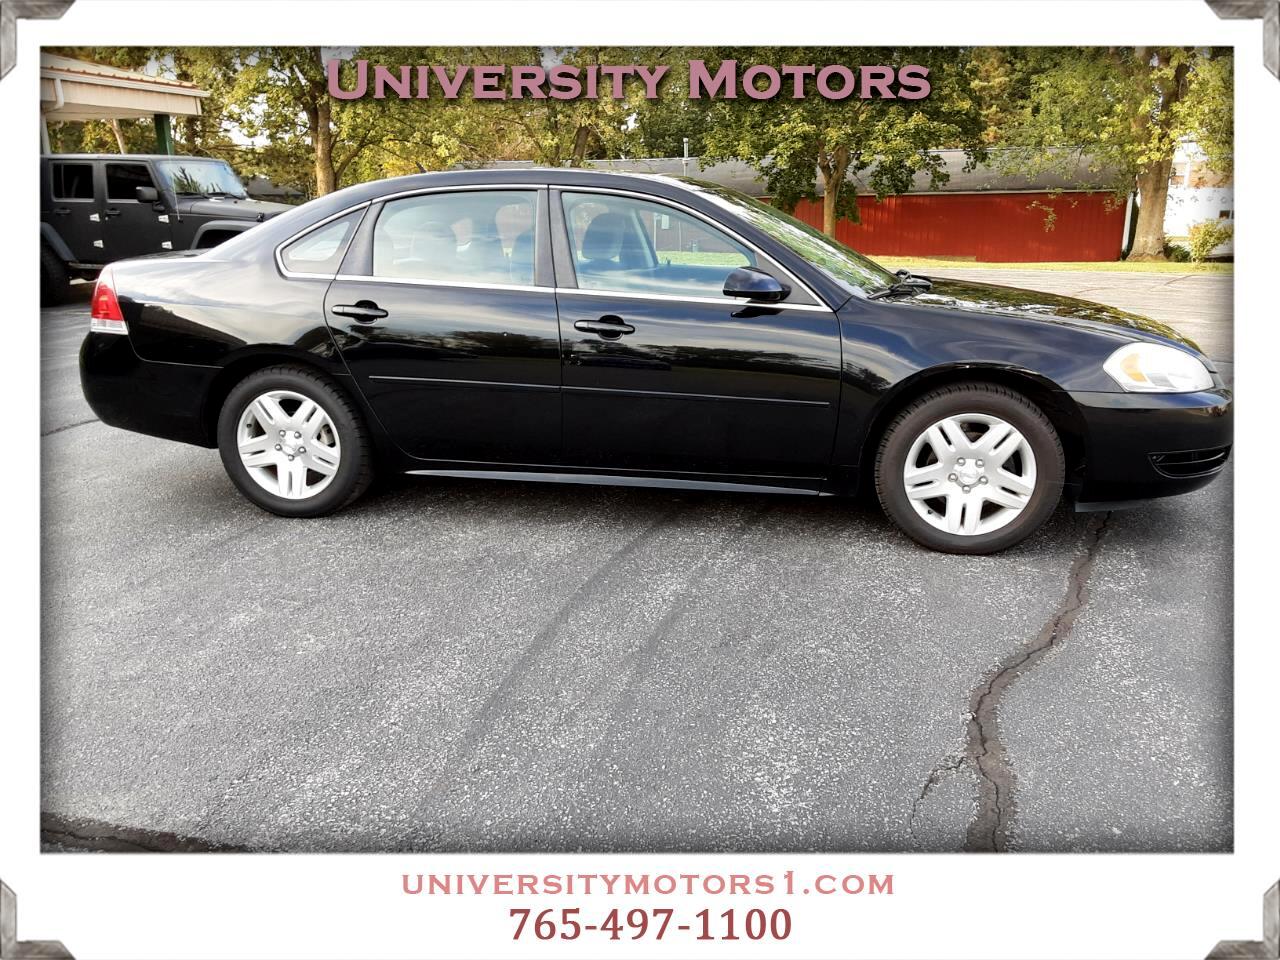 Used 2014 Chevrolet Impala Limited LT for Sale in West Lafayette IN 47906  University Motors